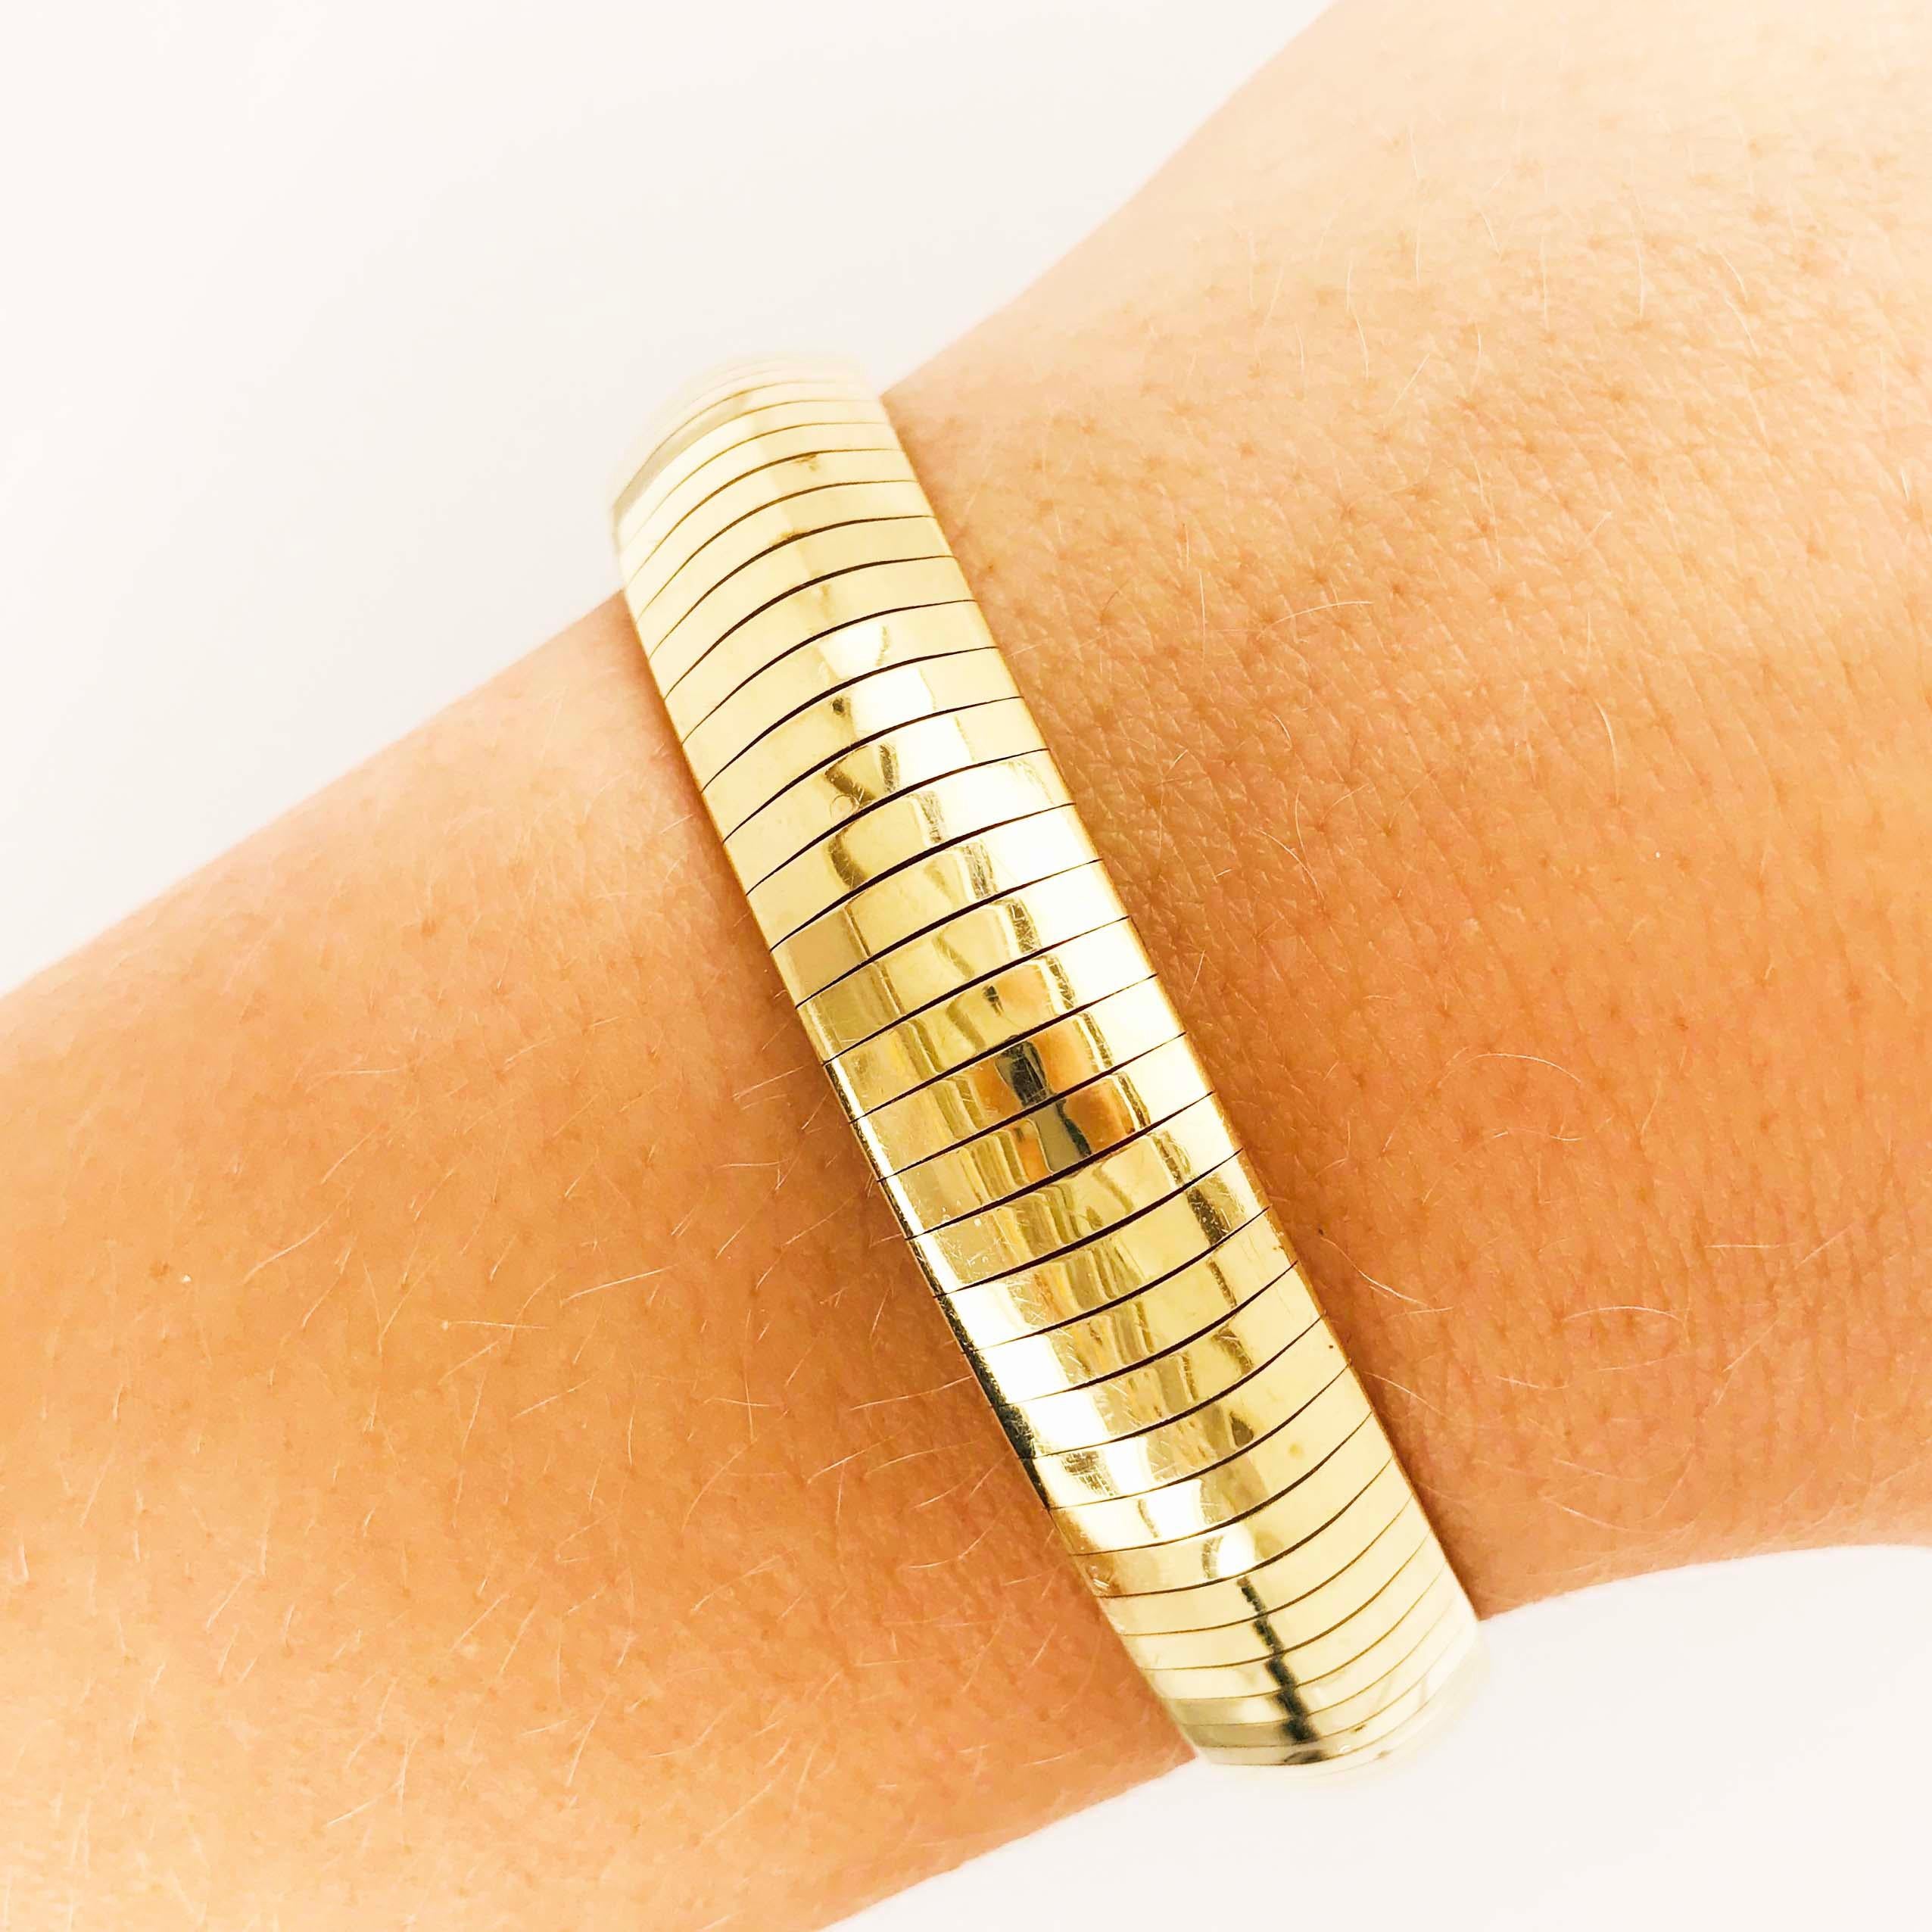 The 14kt yellow gold omega bracelet is Circa 1995.  This is during the time that they made the bracelets thicker and more sturdy.  The bracelet is 11 millimeters wide and 7 inches long.  It has a rich, buttery color and conforms around your wrist